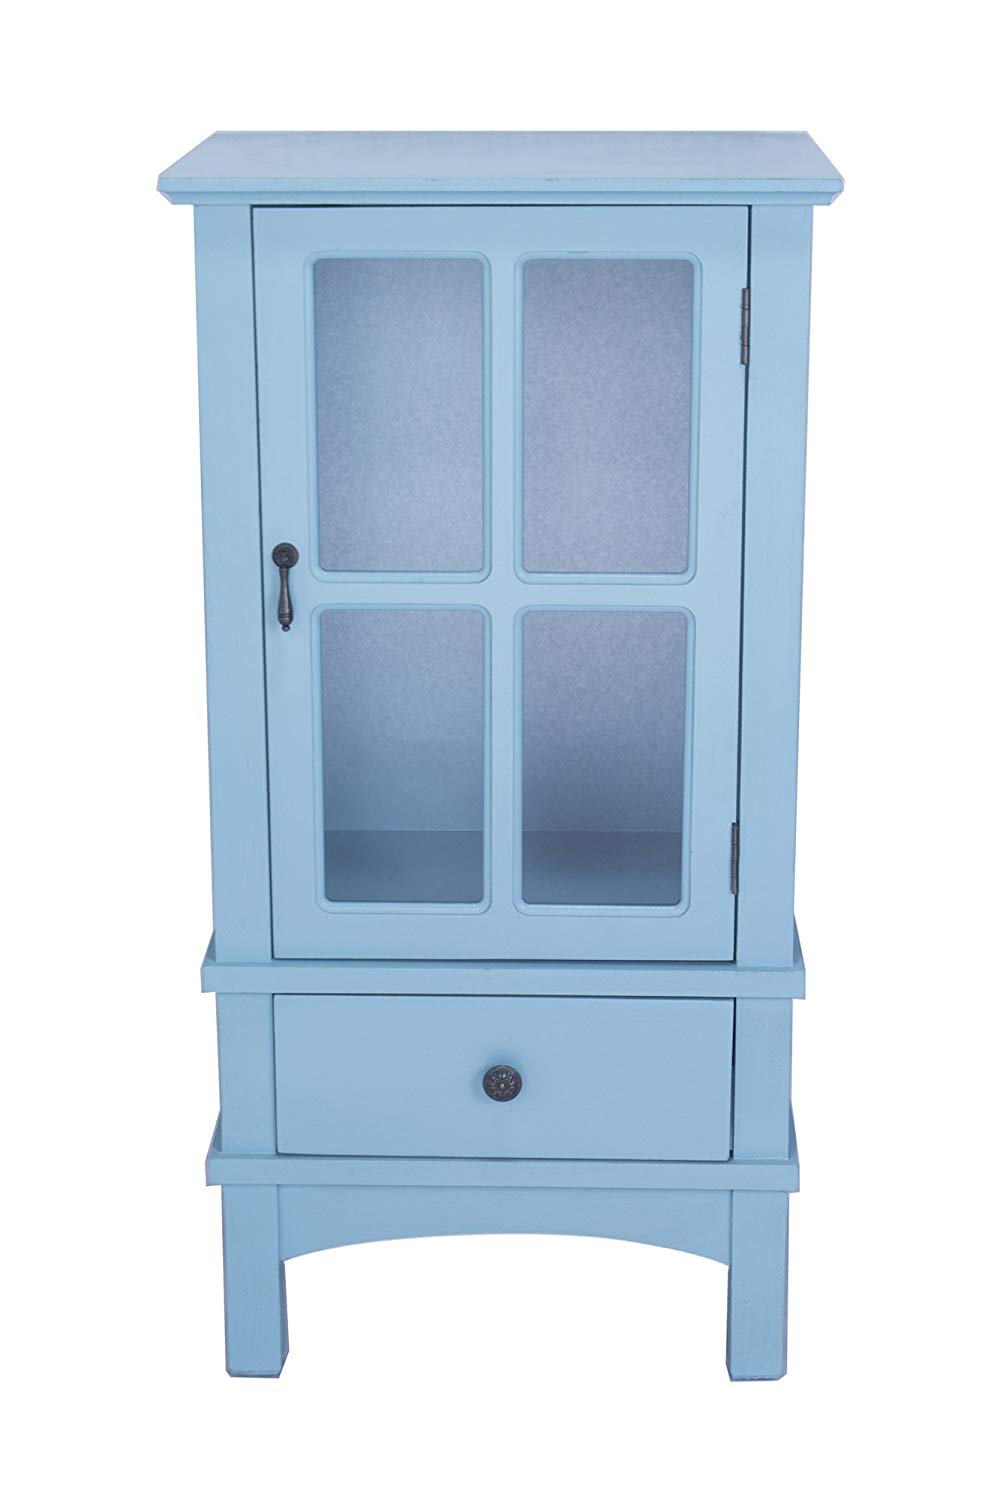 18" X 13" X 36" Aqua MDF Wood Clear Glass Accent Cabinet with a Door and Drawer and Paned Inserts